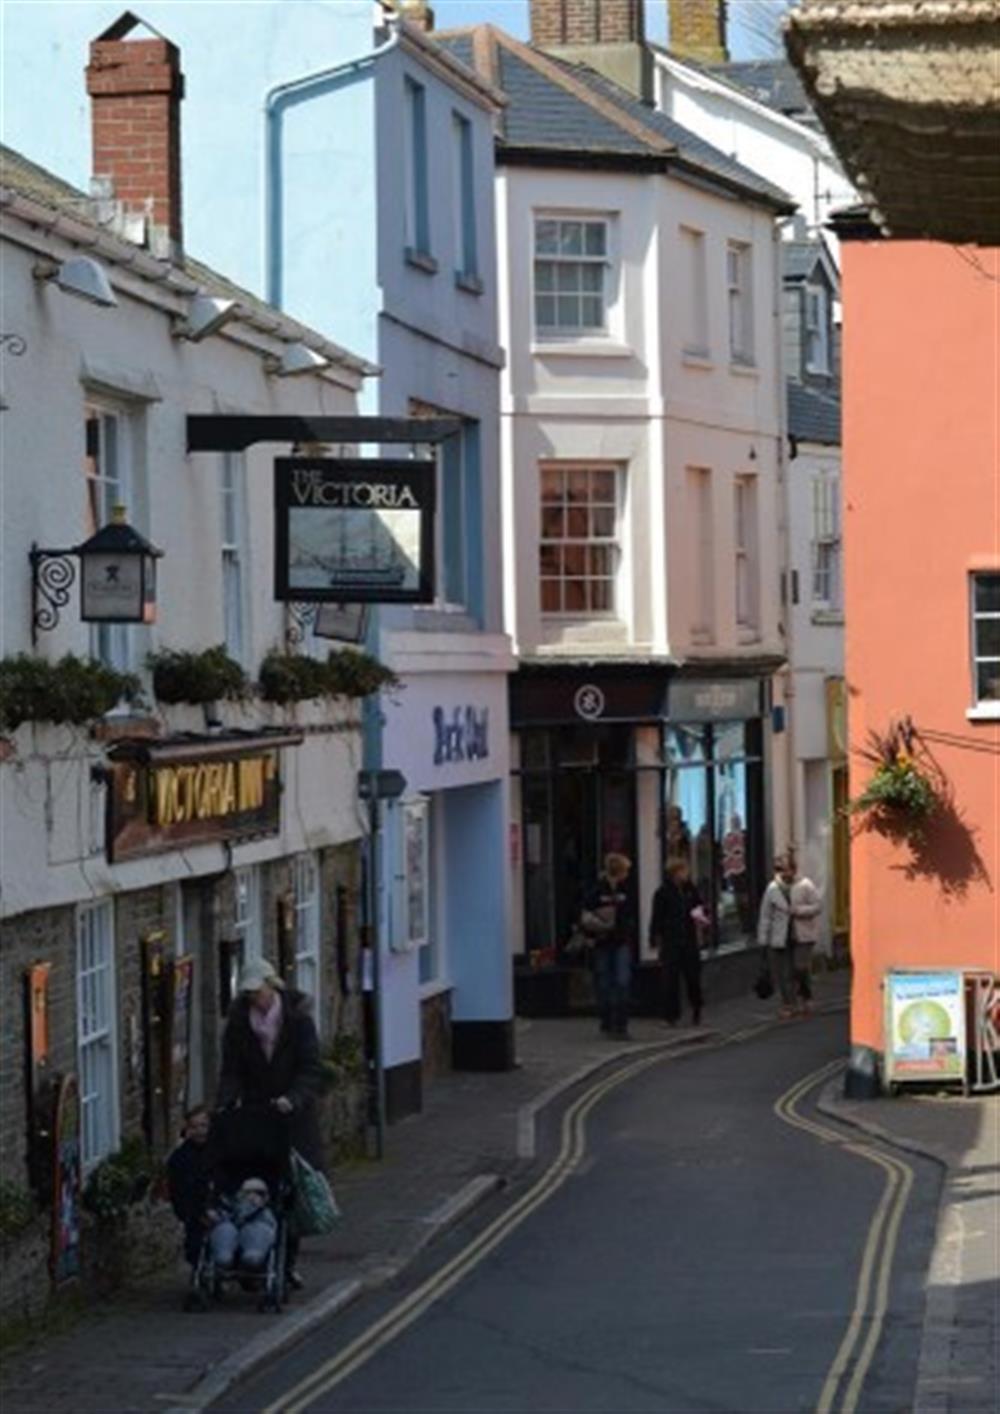 Salcombe Fore Street is bustling with pubs, restaurants, delicatessens and boutique shops